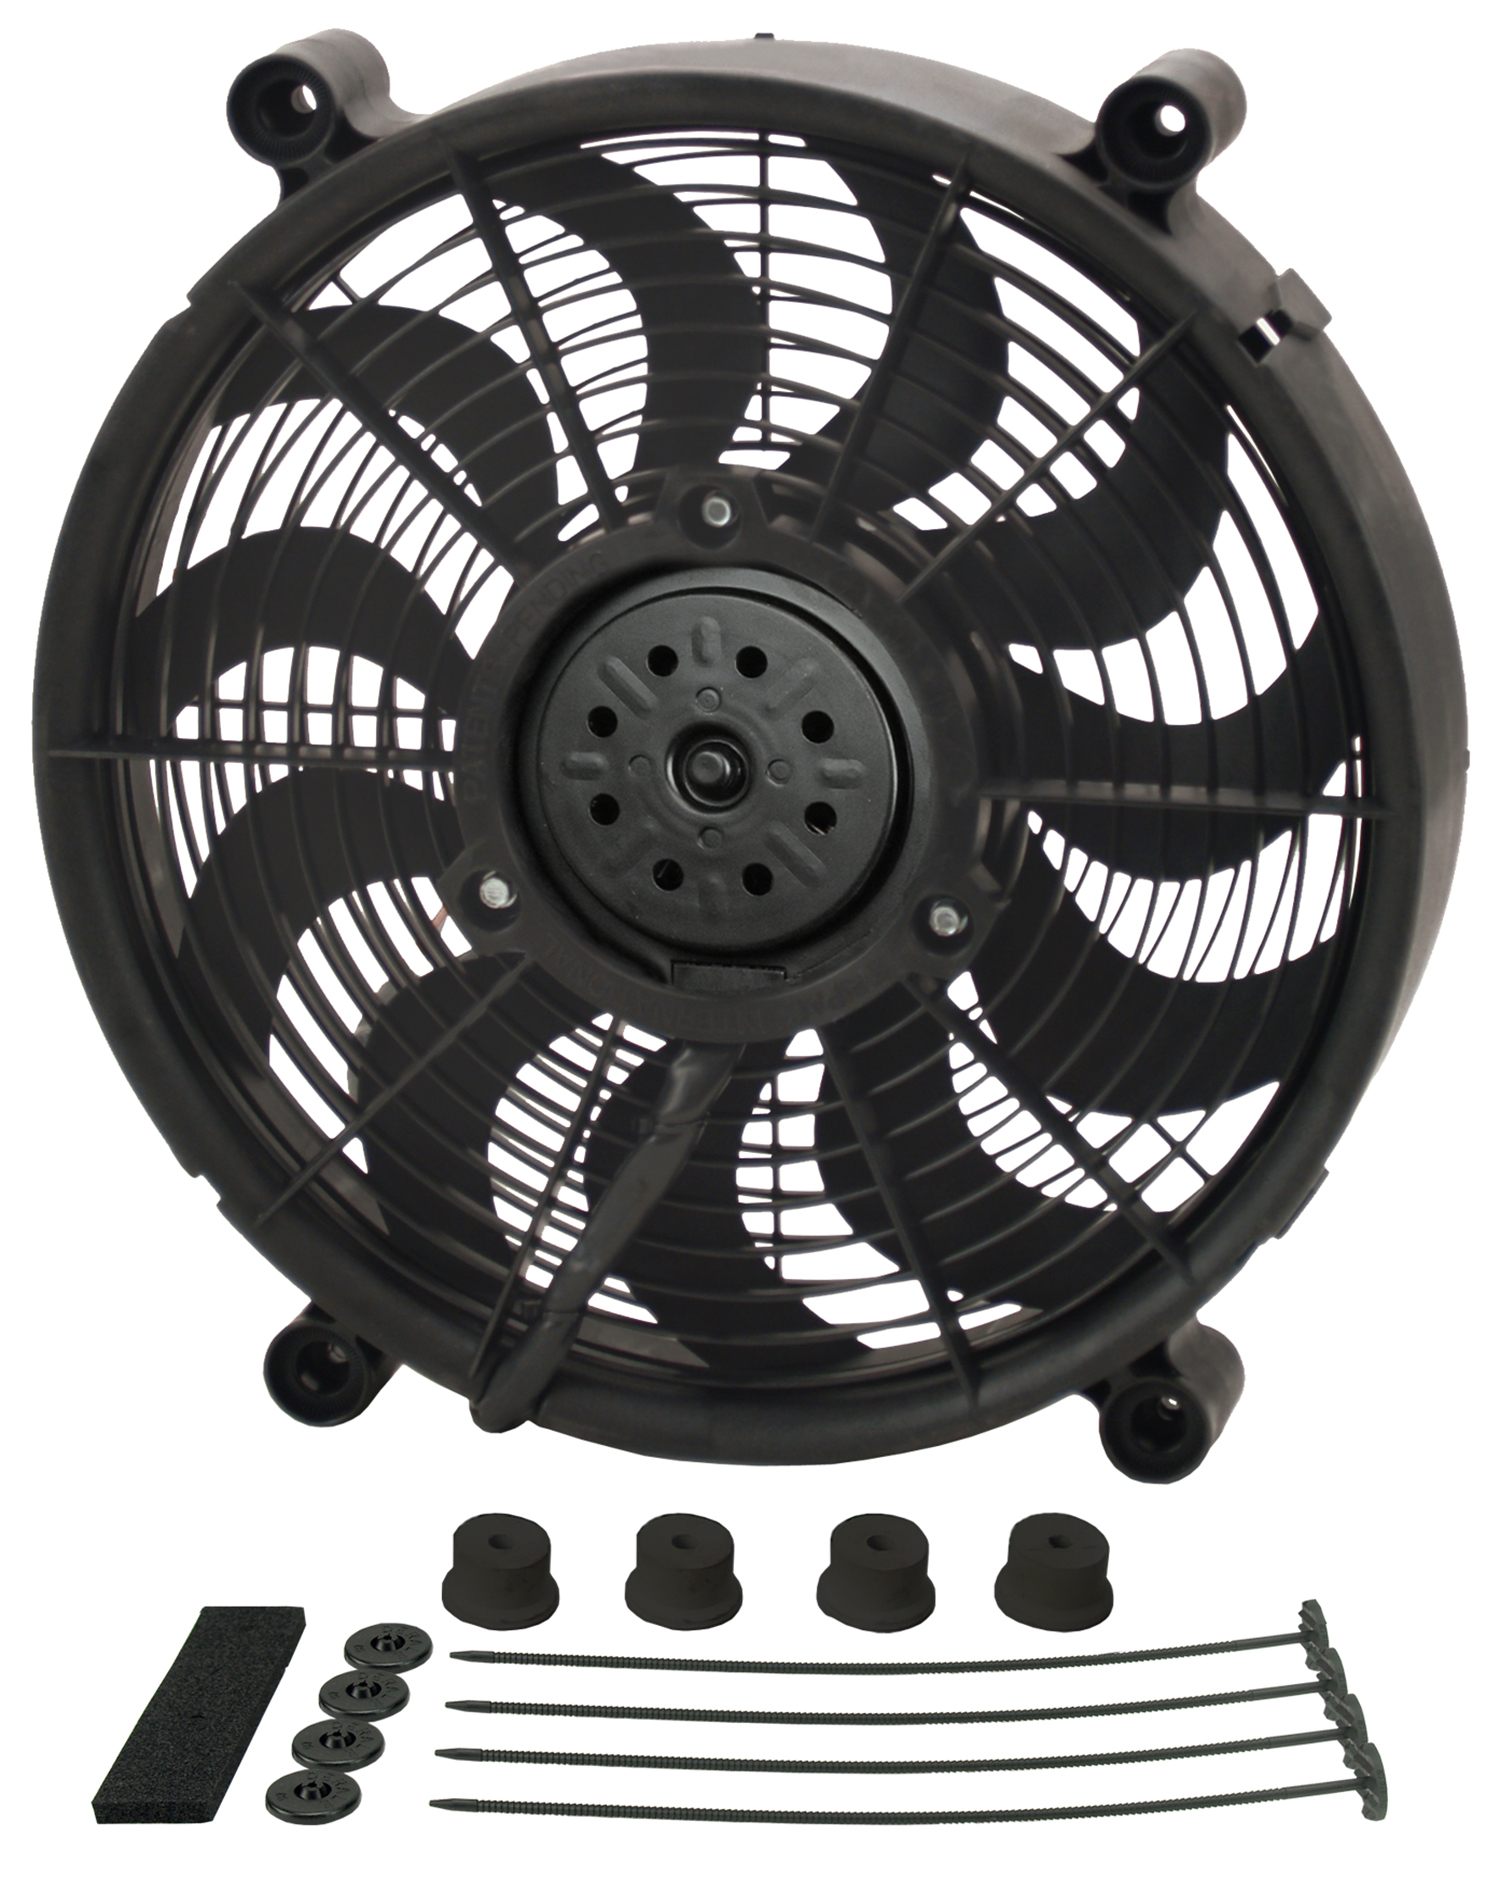 14" High Output Single RAD Pusher/Puller Fan with Standard Mount Kit - 18214